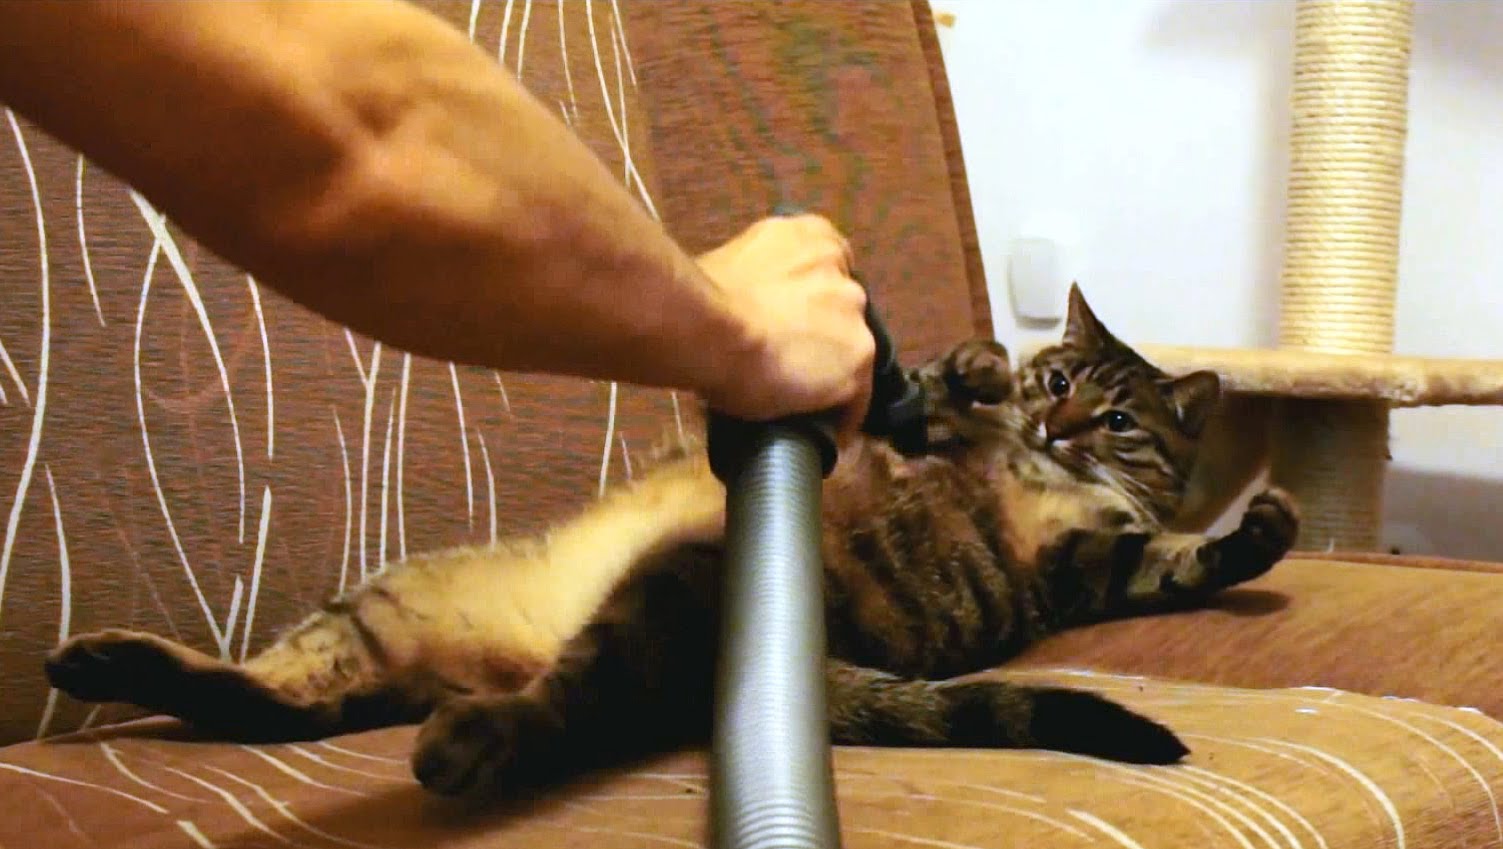 This kitty loves to be vacuumed